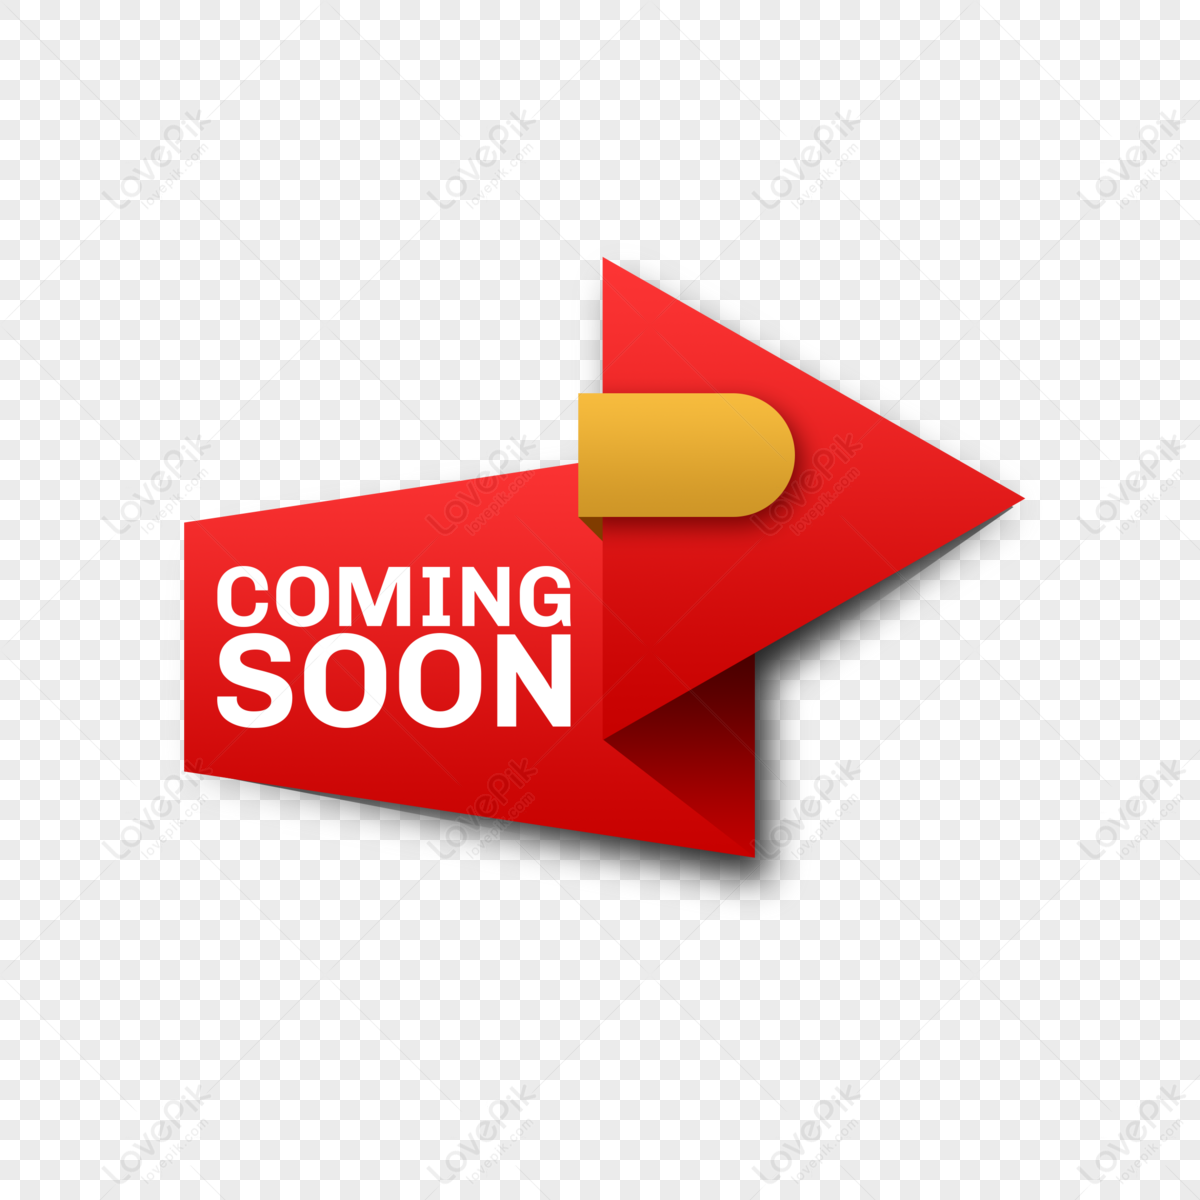 Opening Soon Banner Vector Hd Images, Opening Soon Design With A Hanger  Shape, Grand, Opening, Design PNG Image For Free Download